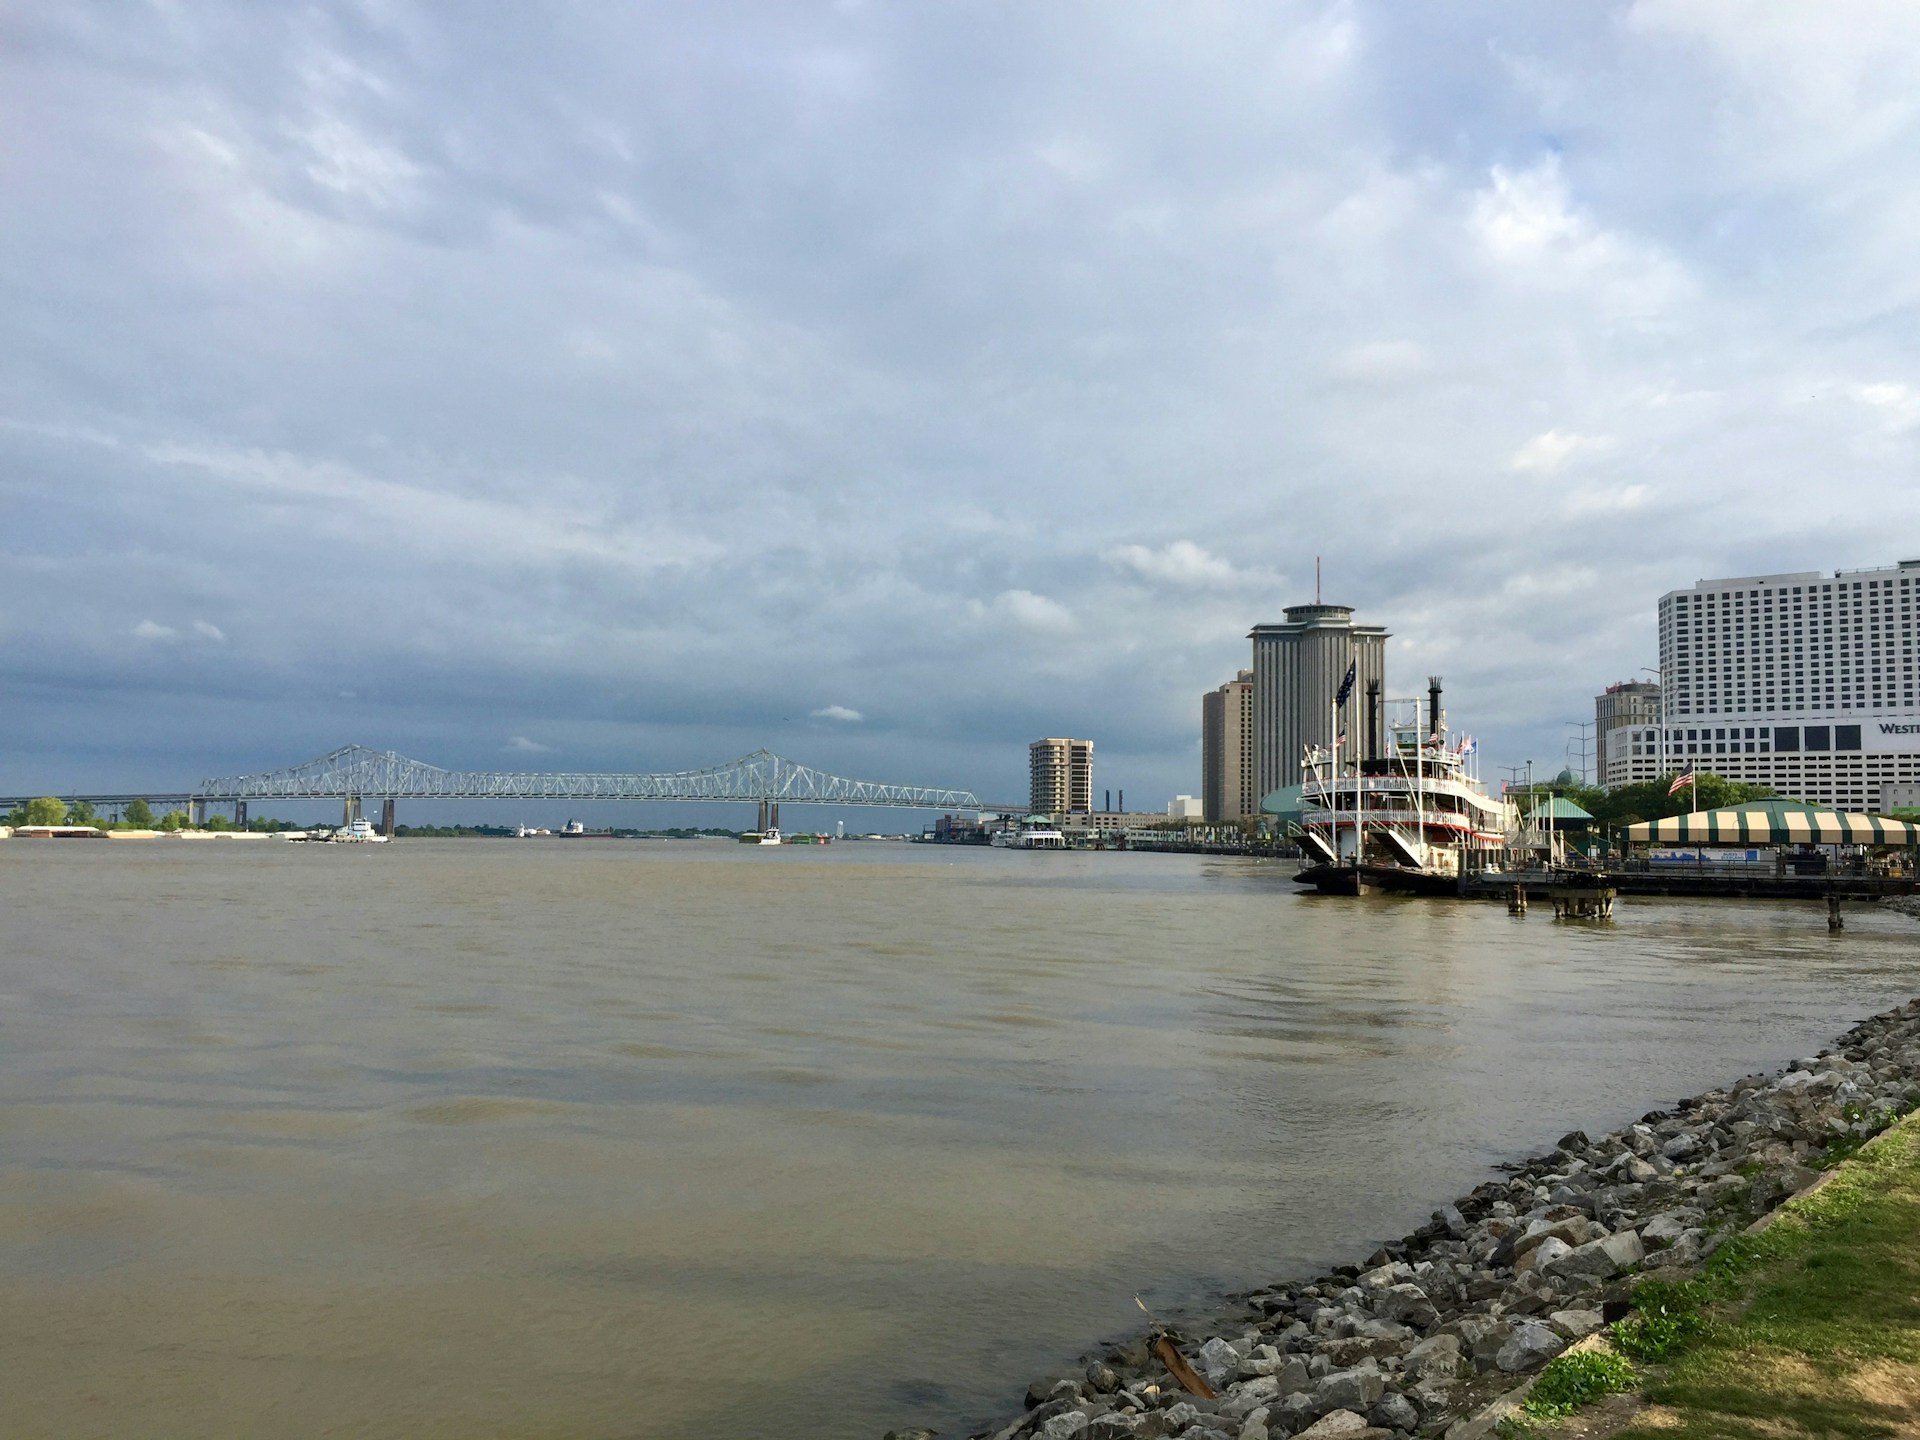 The Port of New Orleans